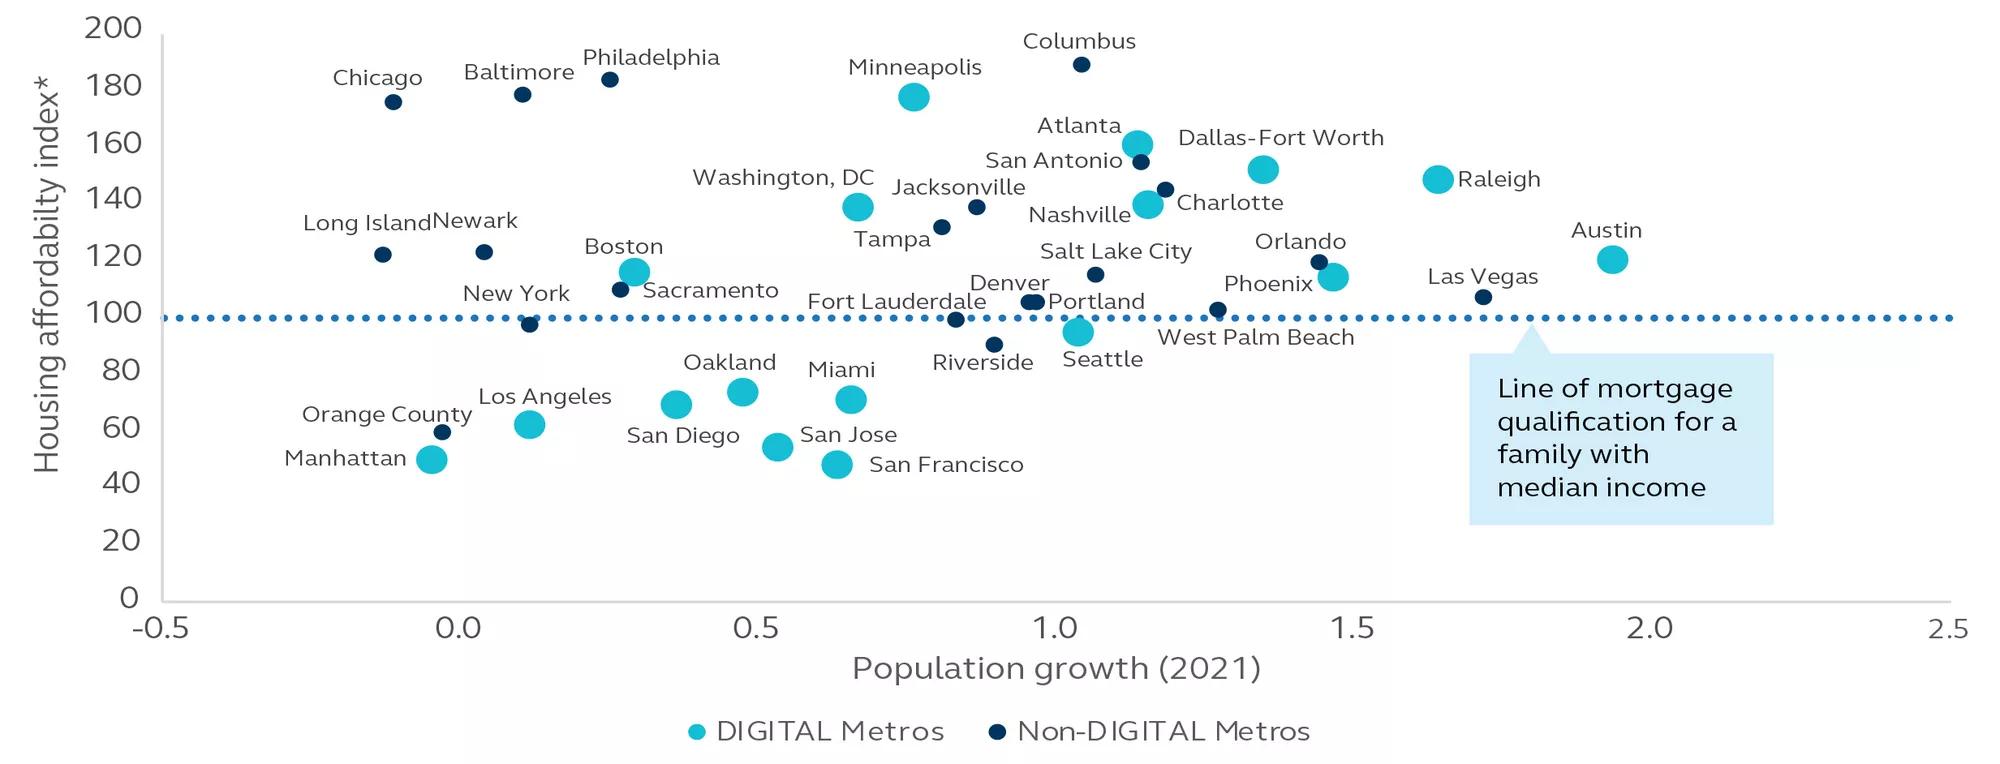 Scatter plot showing the relationship between population growth and housing affordability in the U.S. in 2021